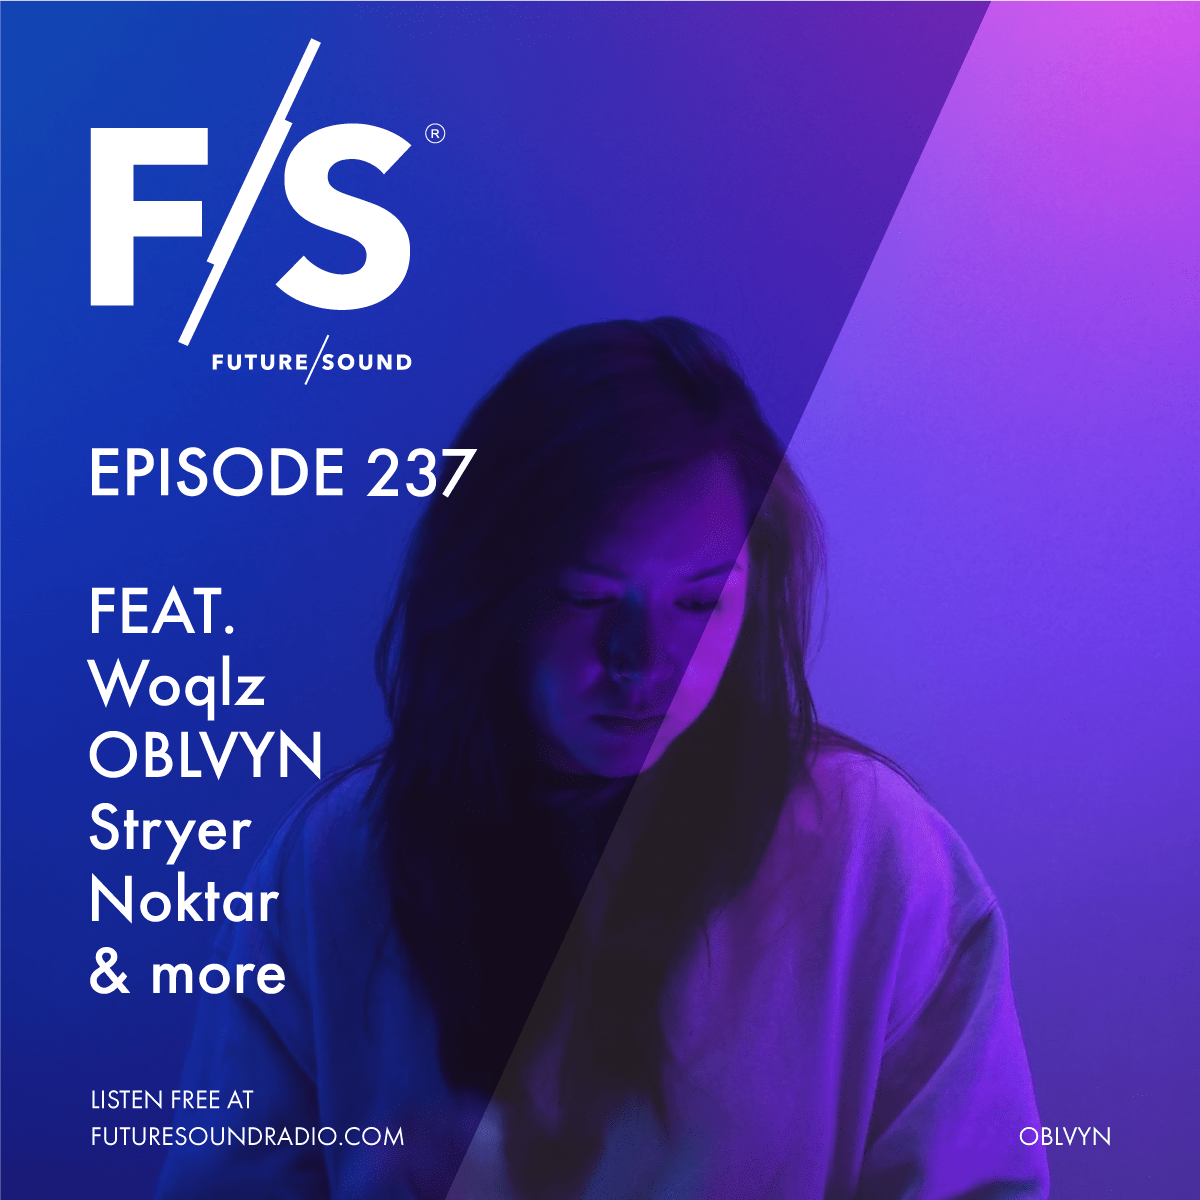 Future/Sound with CUSCINO - Episode 237 feat. Woqlz, OBLVYN, Stryer, Noktar and more